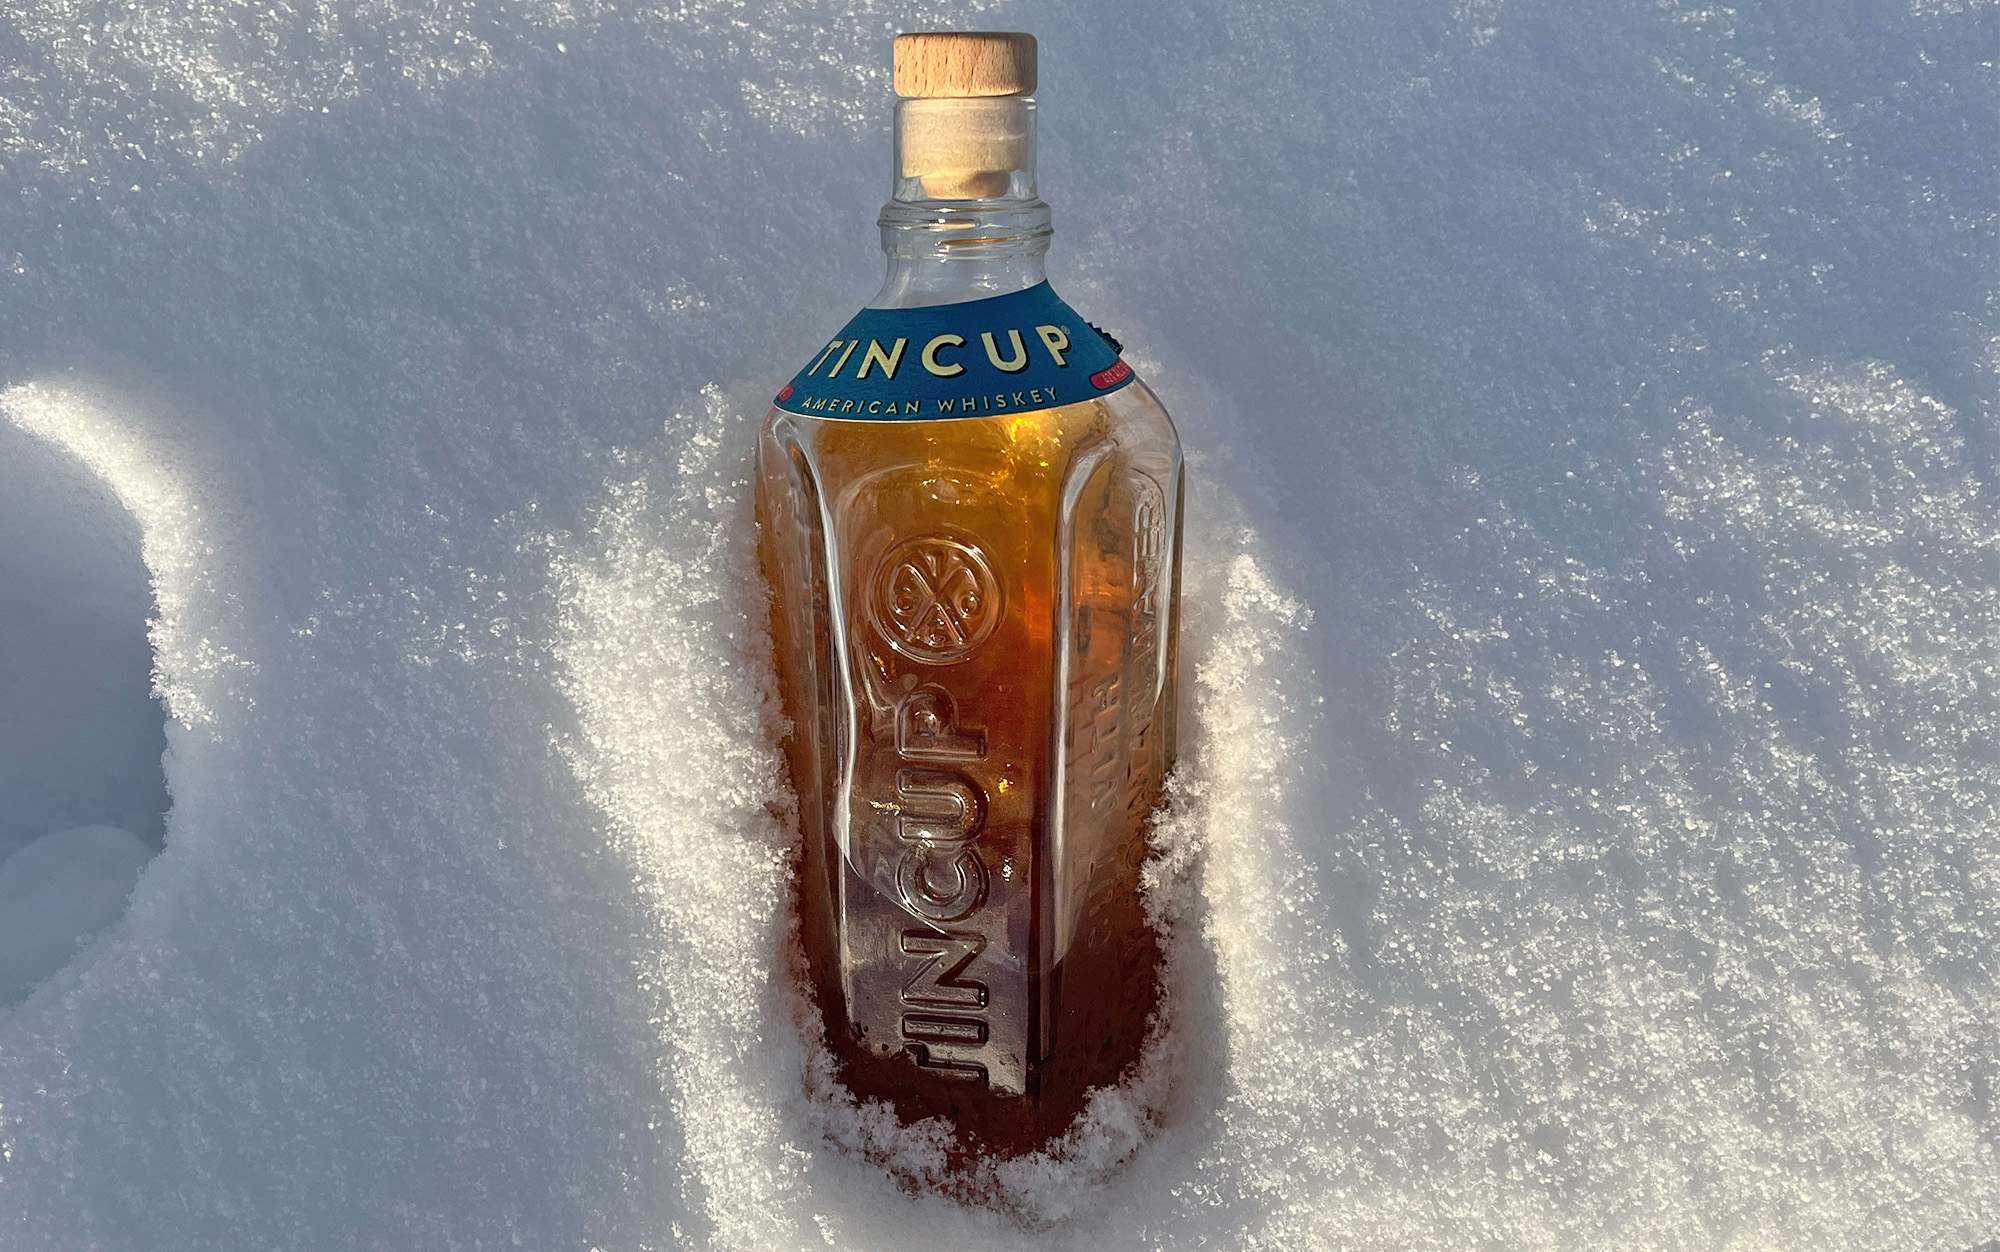 https://www.outdoorlife.com/wp-content/uploads/2023/01/12/Tincup-American-Whiskey-bottle.jpg